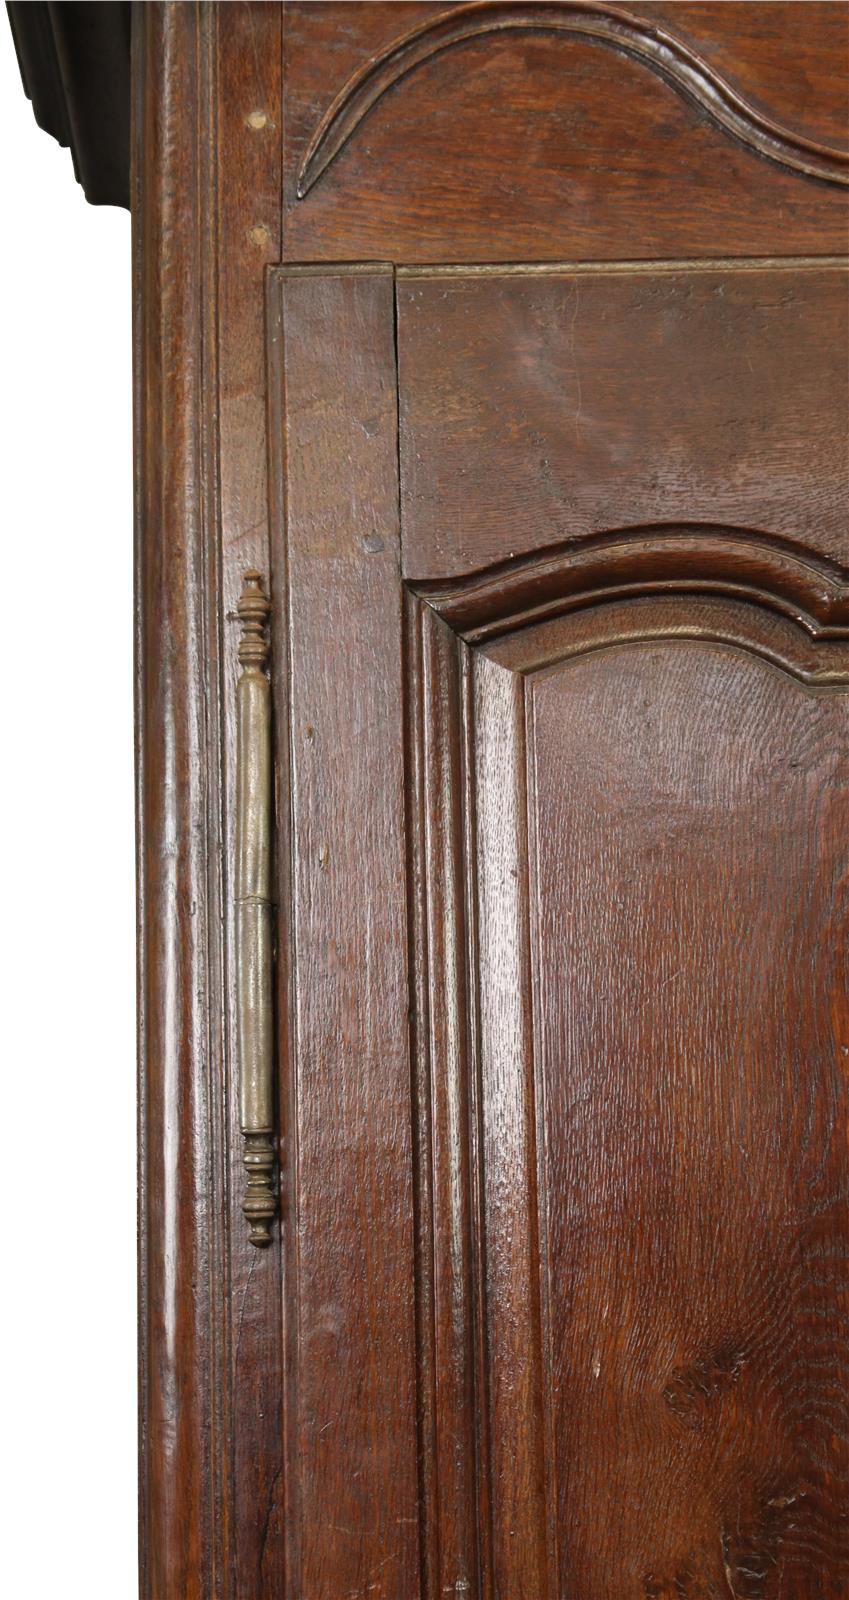 Armoire Antique French Provincial Very Old 1790 Oak Wood Peg Construction Heart -Image 5